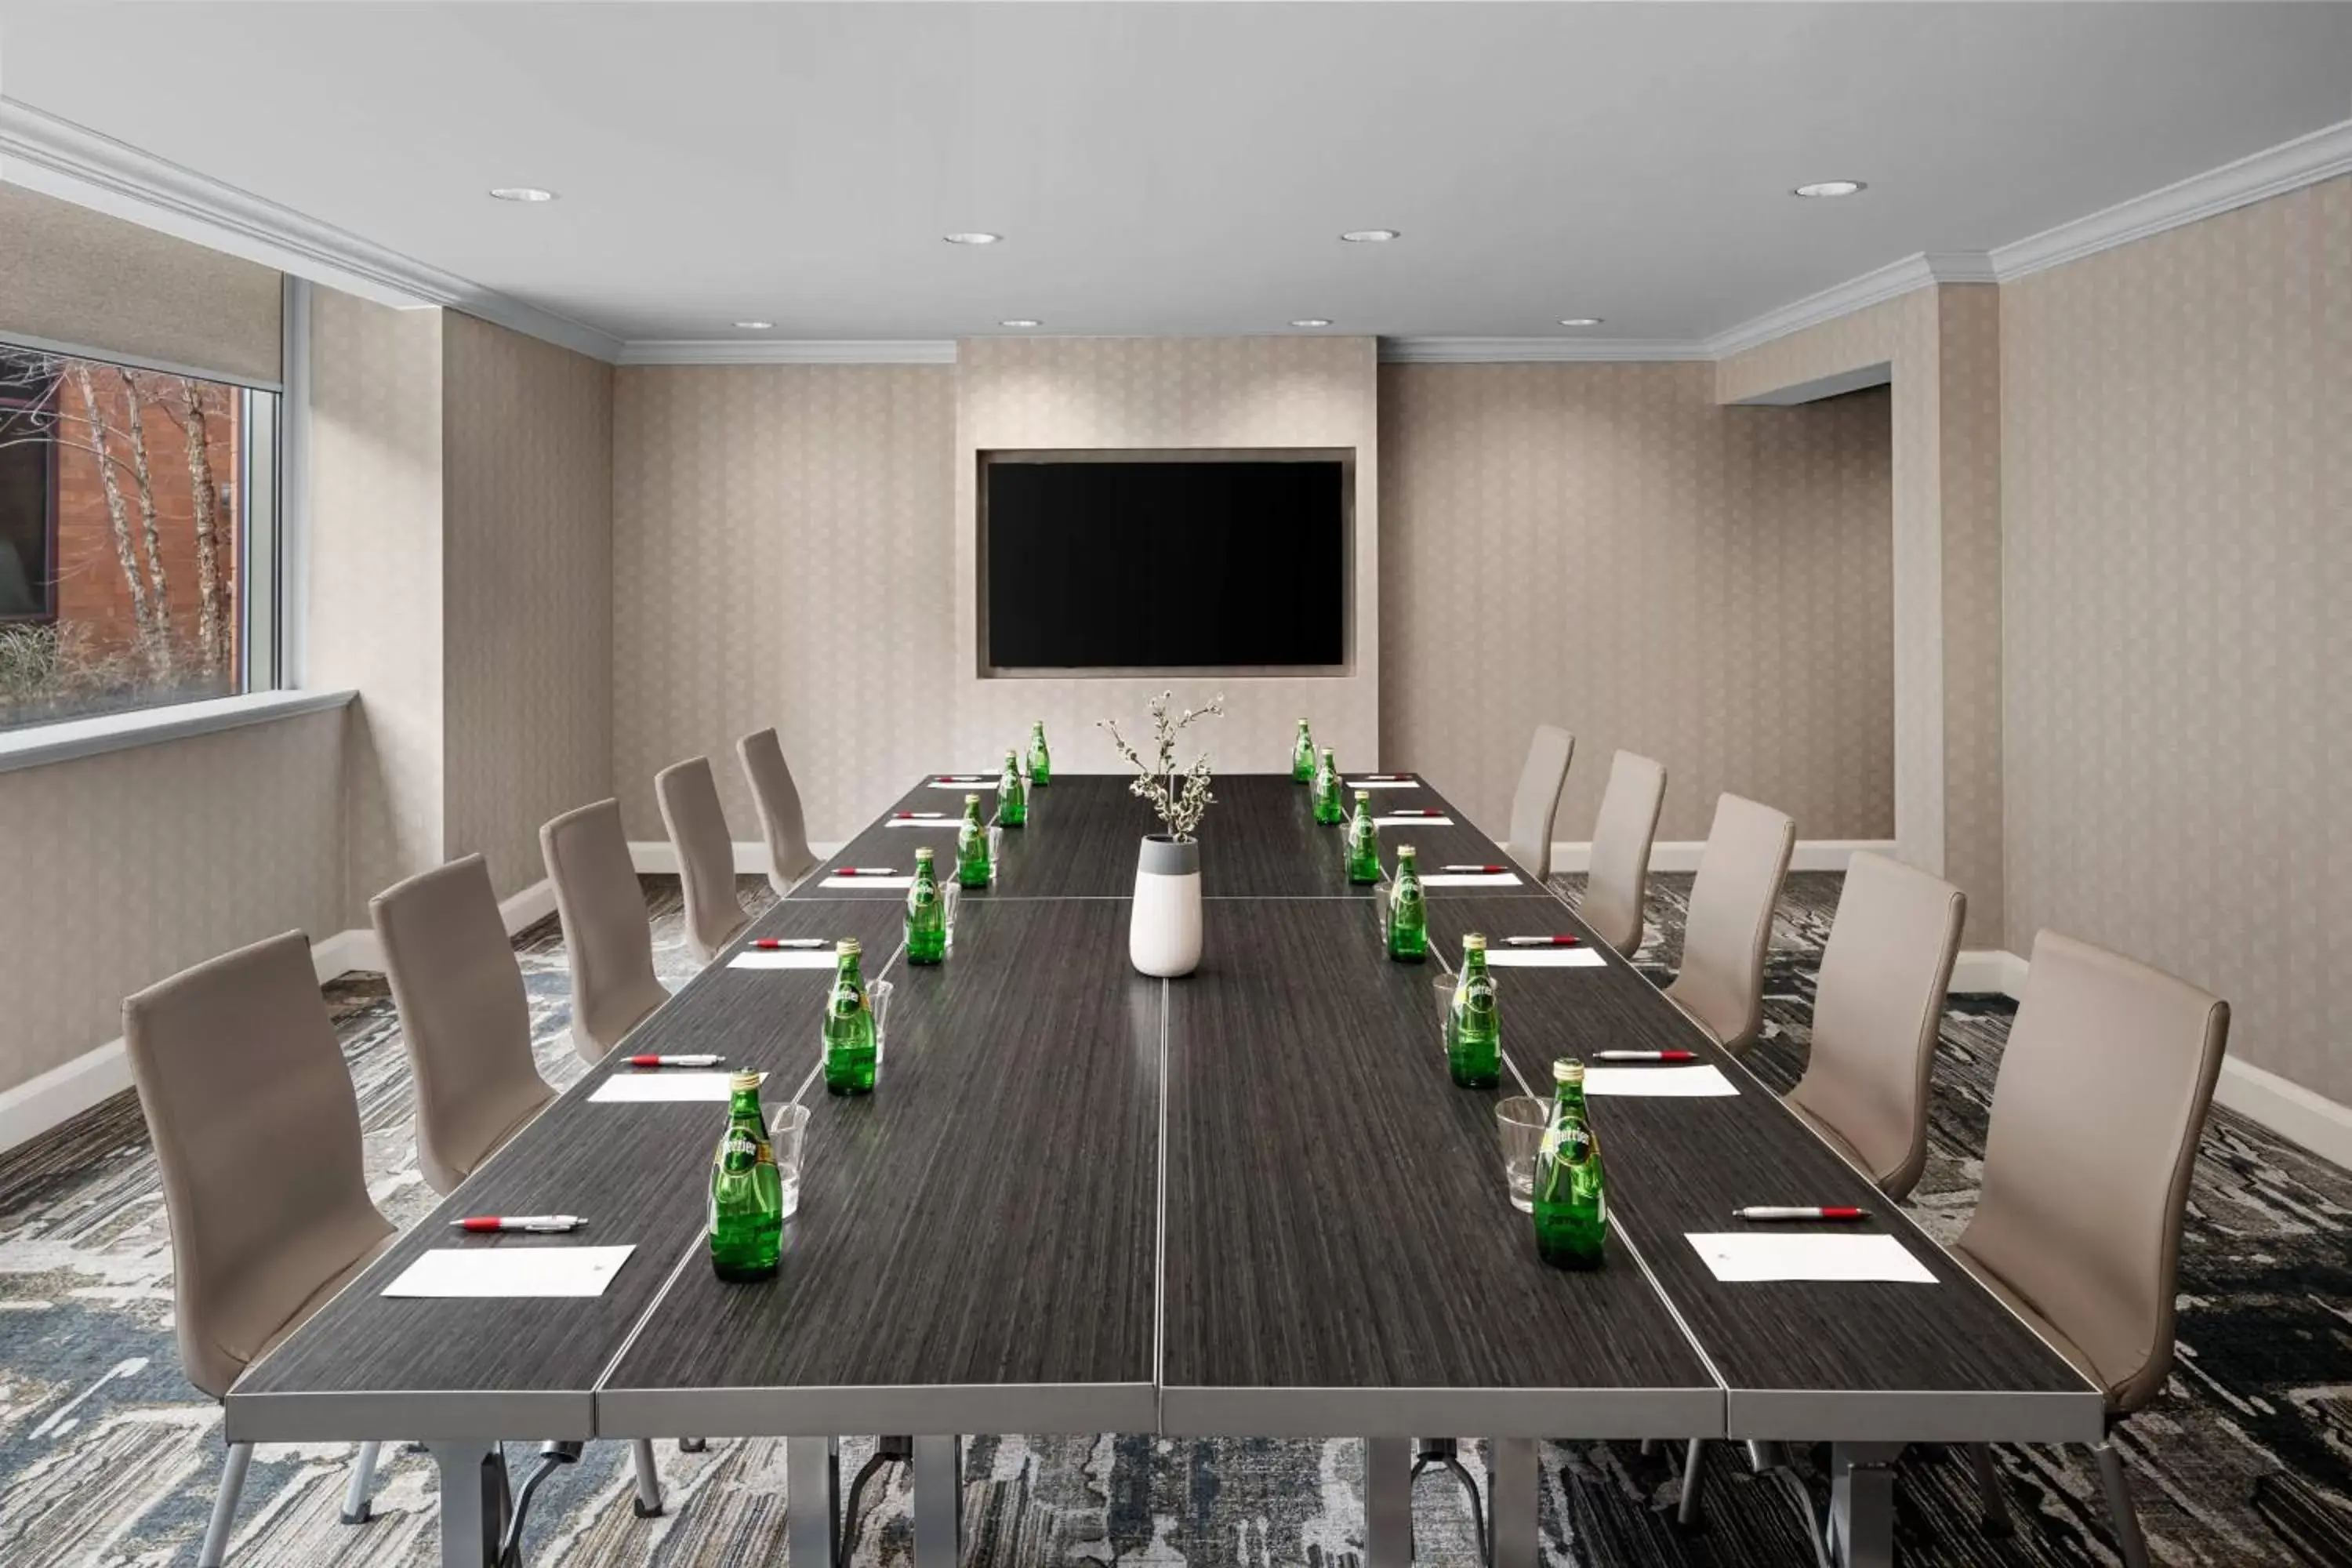 Meeting/conference room in Cleveland Marriott East